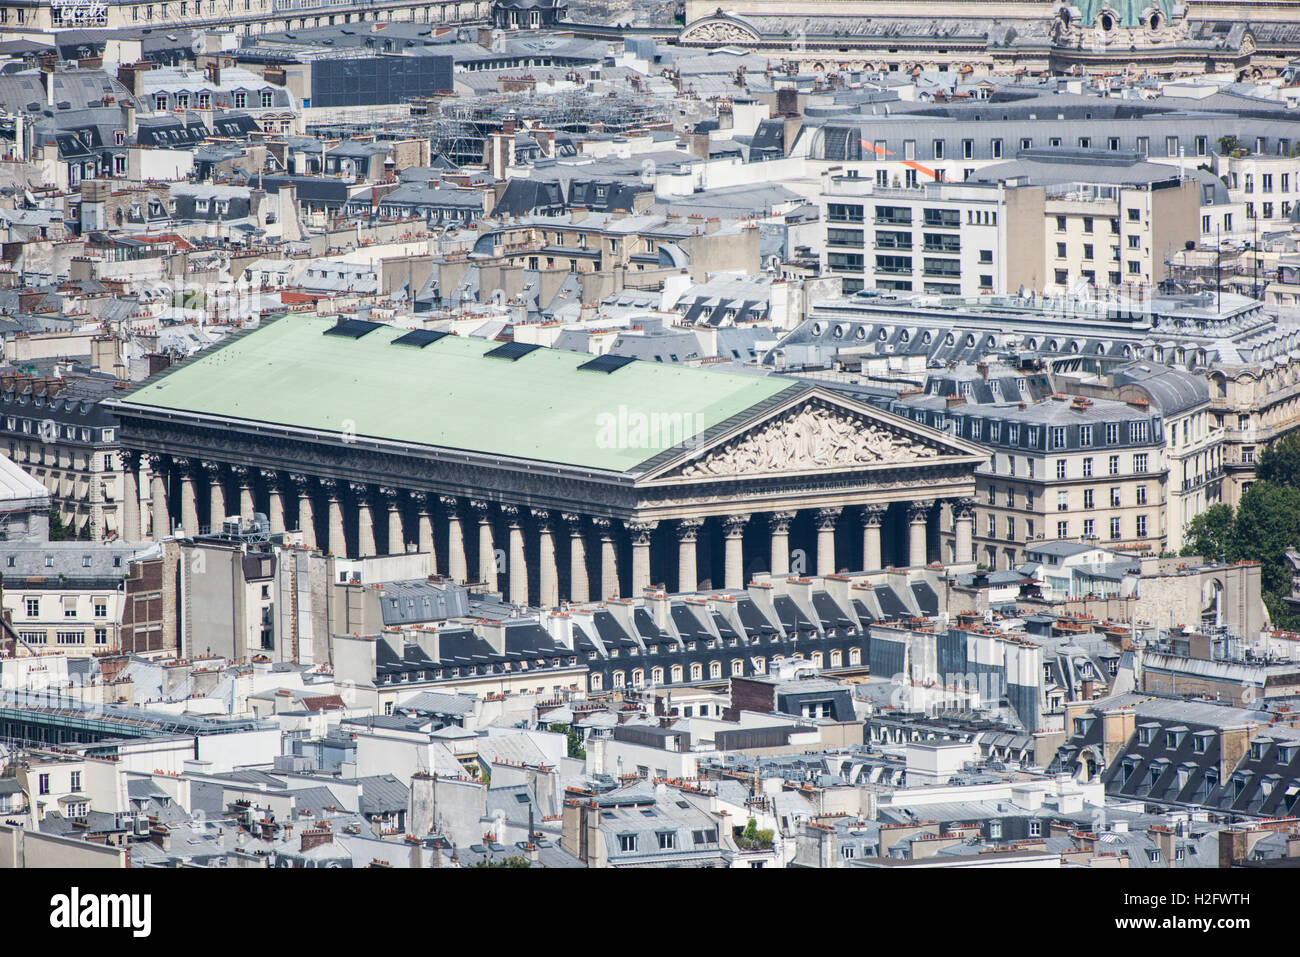 Aerial view of L'église de la Madeleine in Paris as seen from the Eiffel Tower Stock Photo